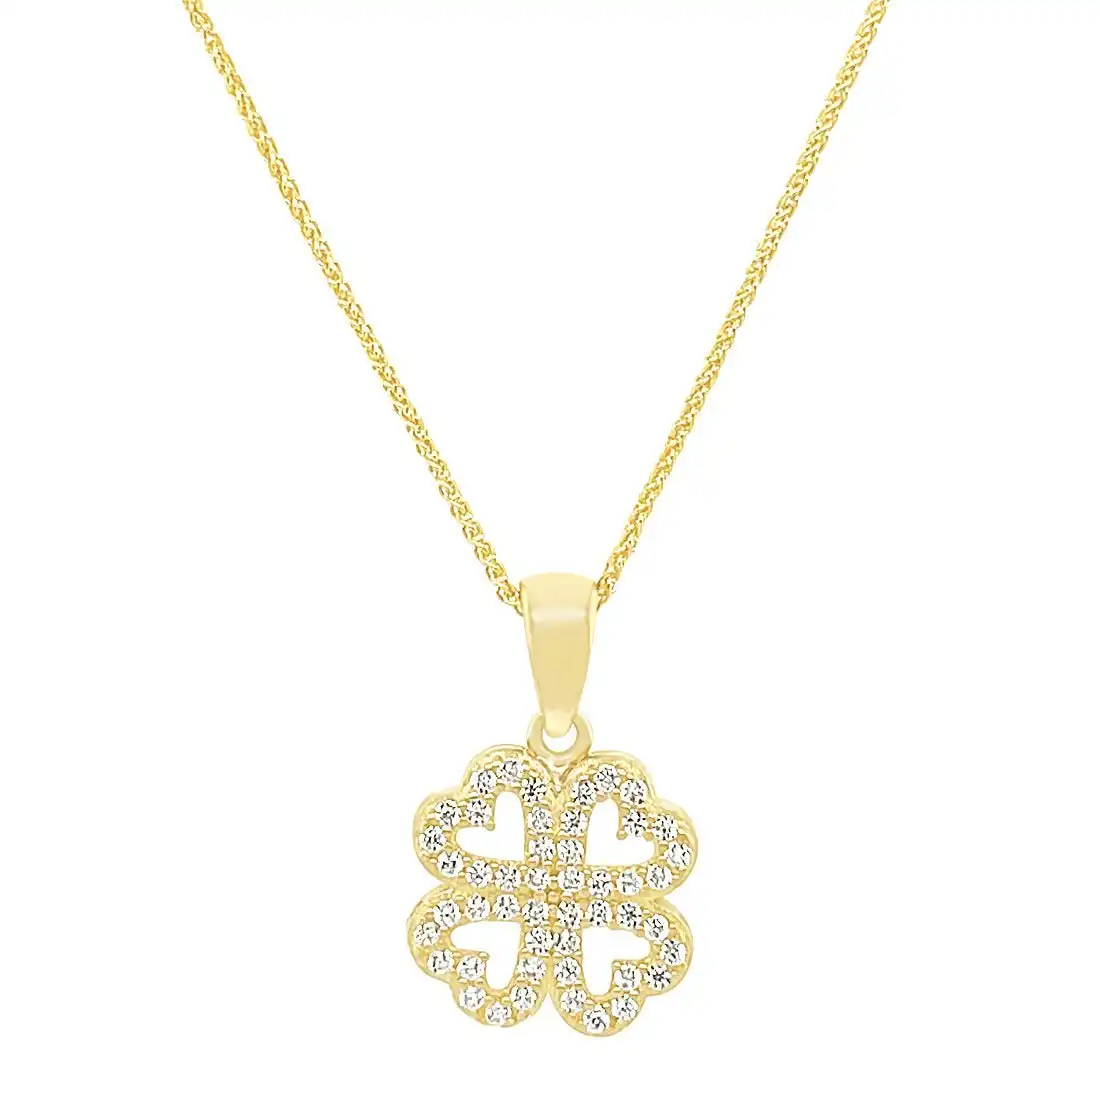 9ct Yellow Gold 4 Leaf Clover Necklace with Cubic Zirconia